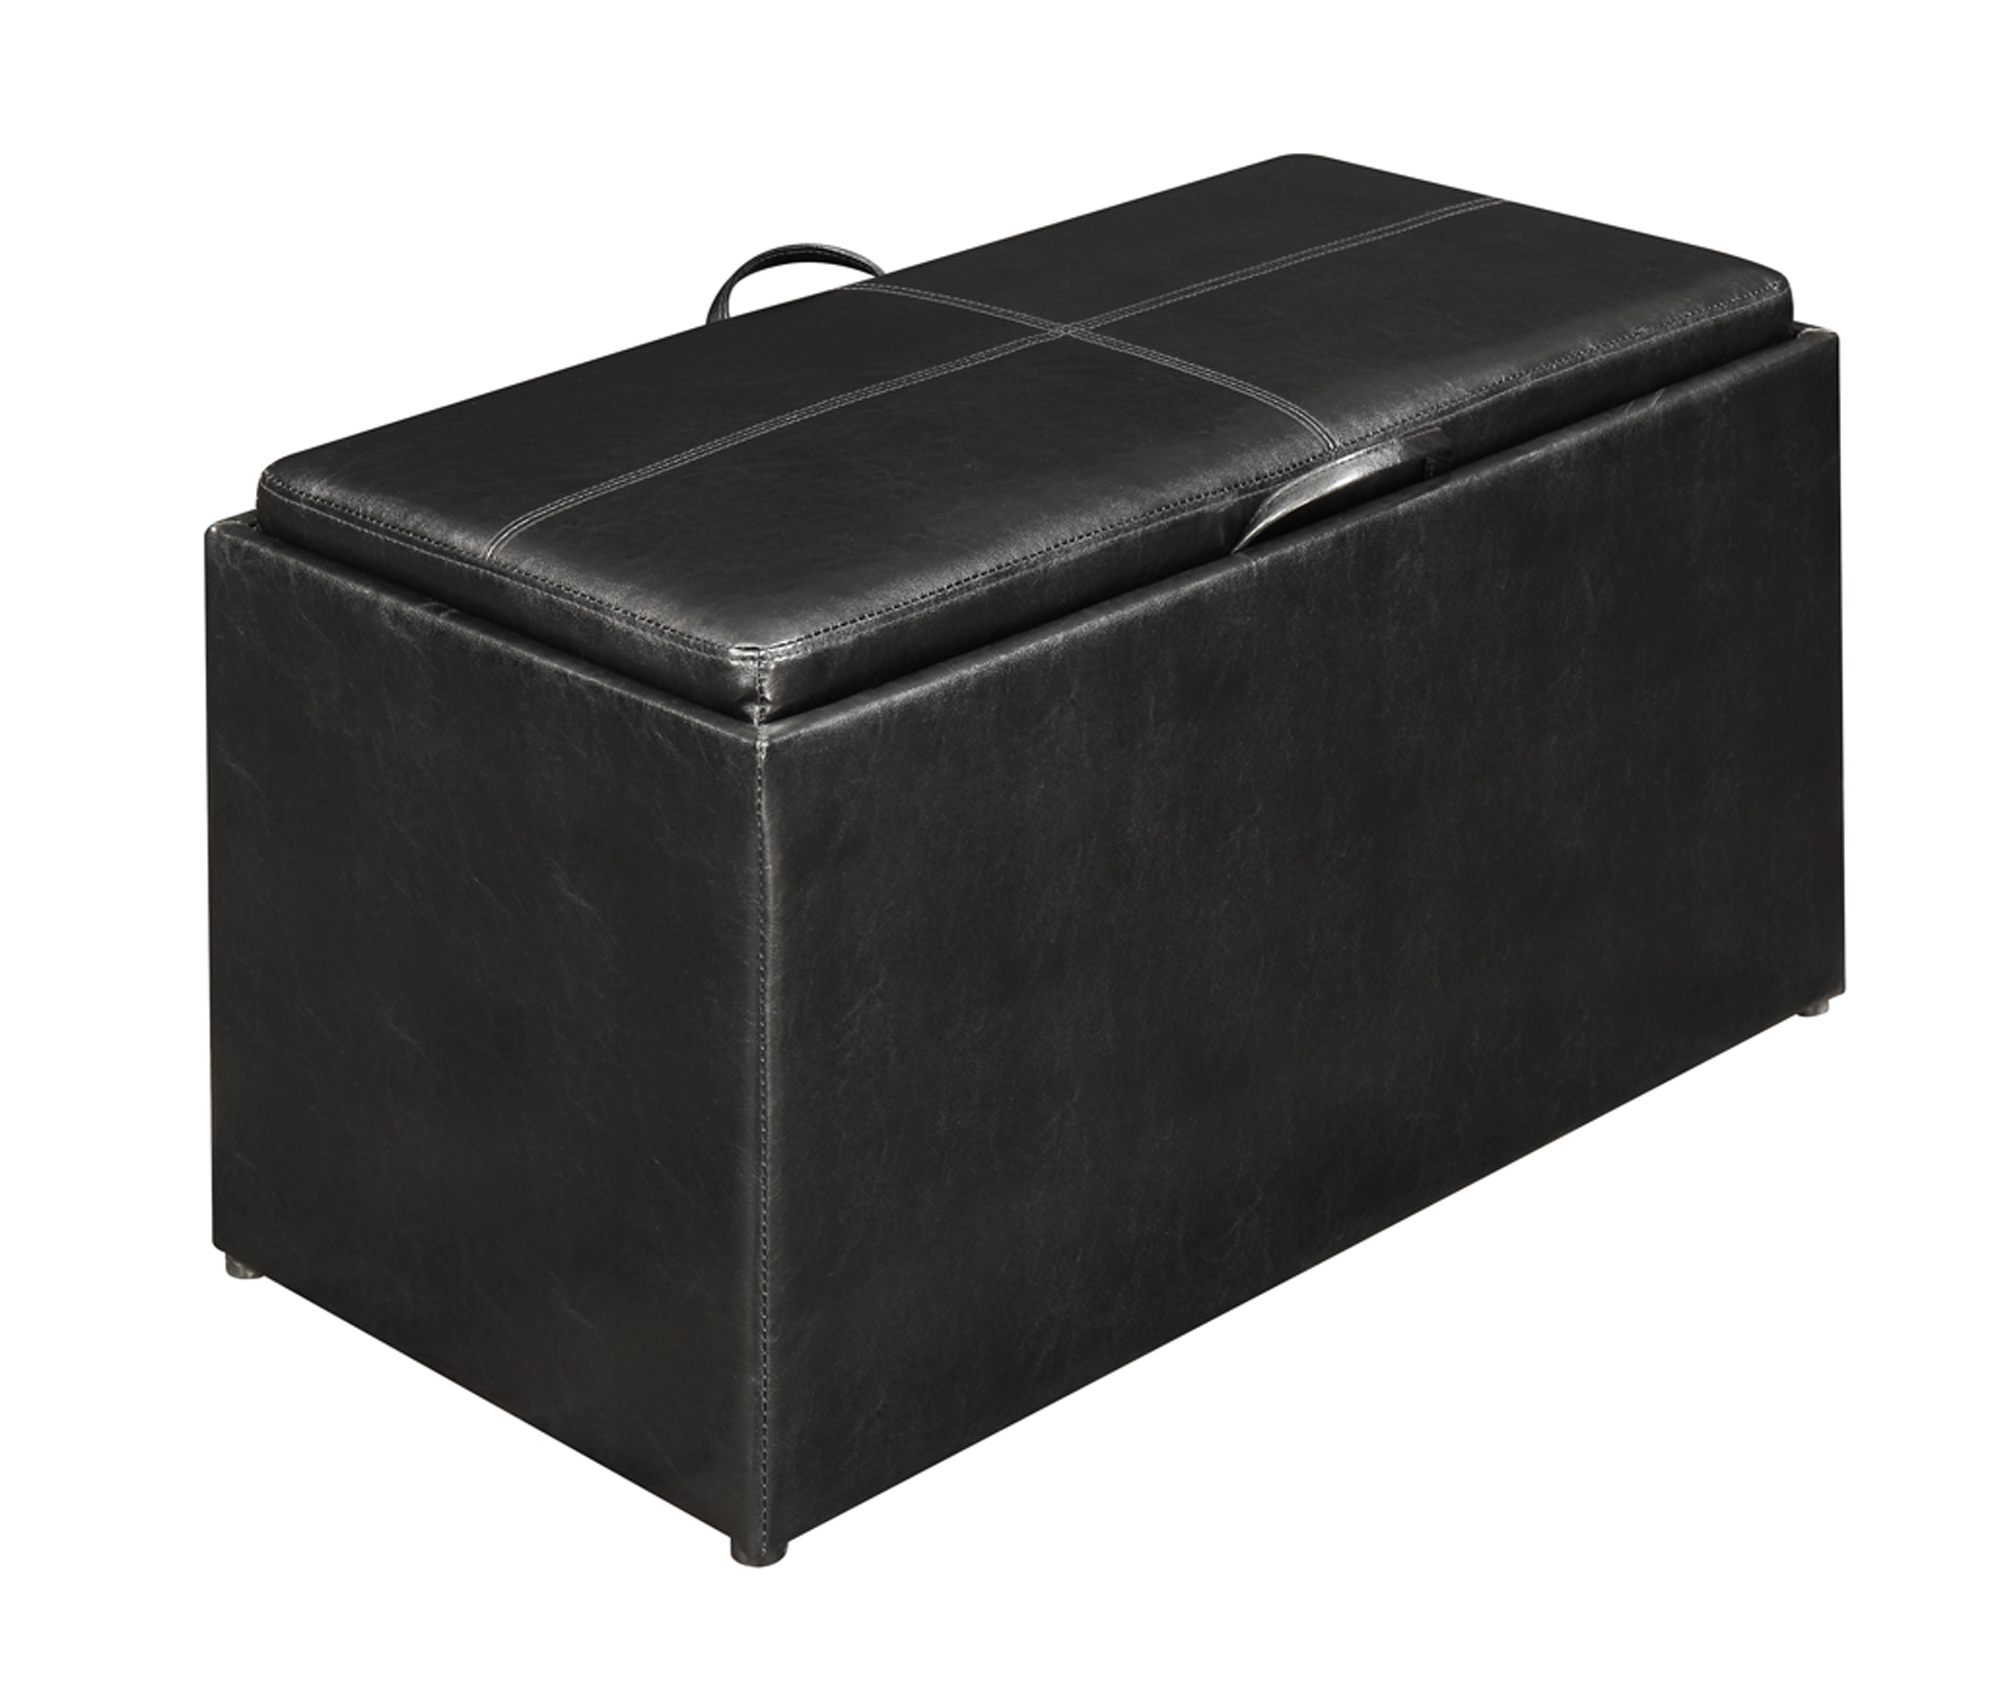 Convenience Concepts Designs4Comfort Sheridan Storage Bench with Reversible Tray and 2 Side Ottomans, Black Faux Leather - image 2 of 7